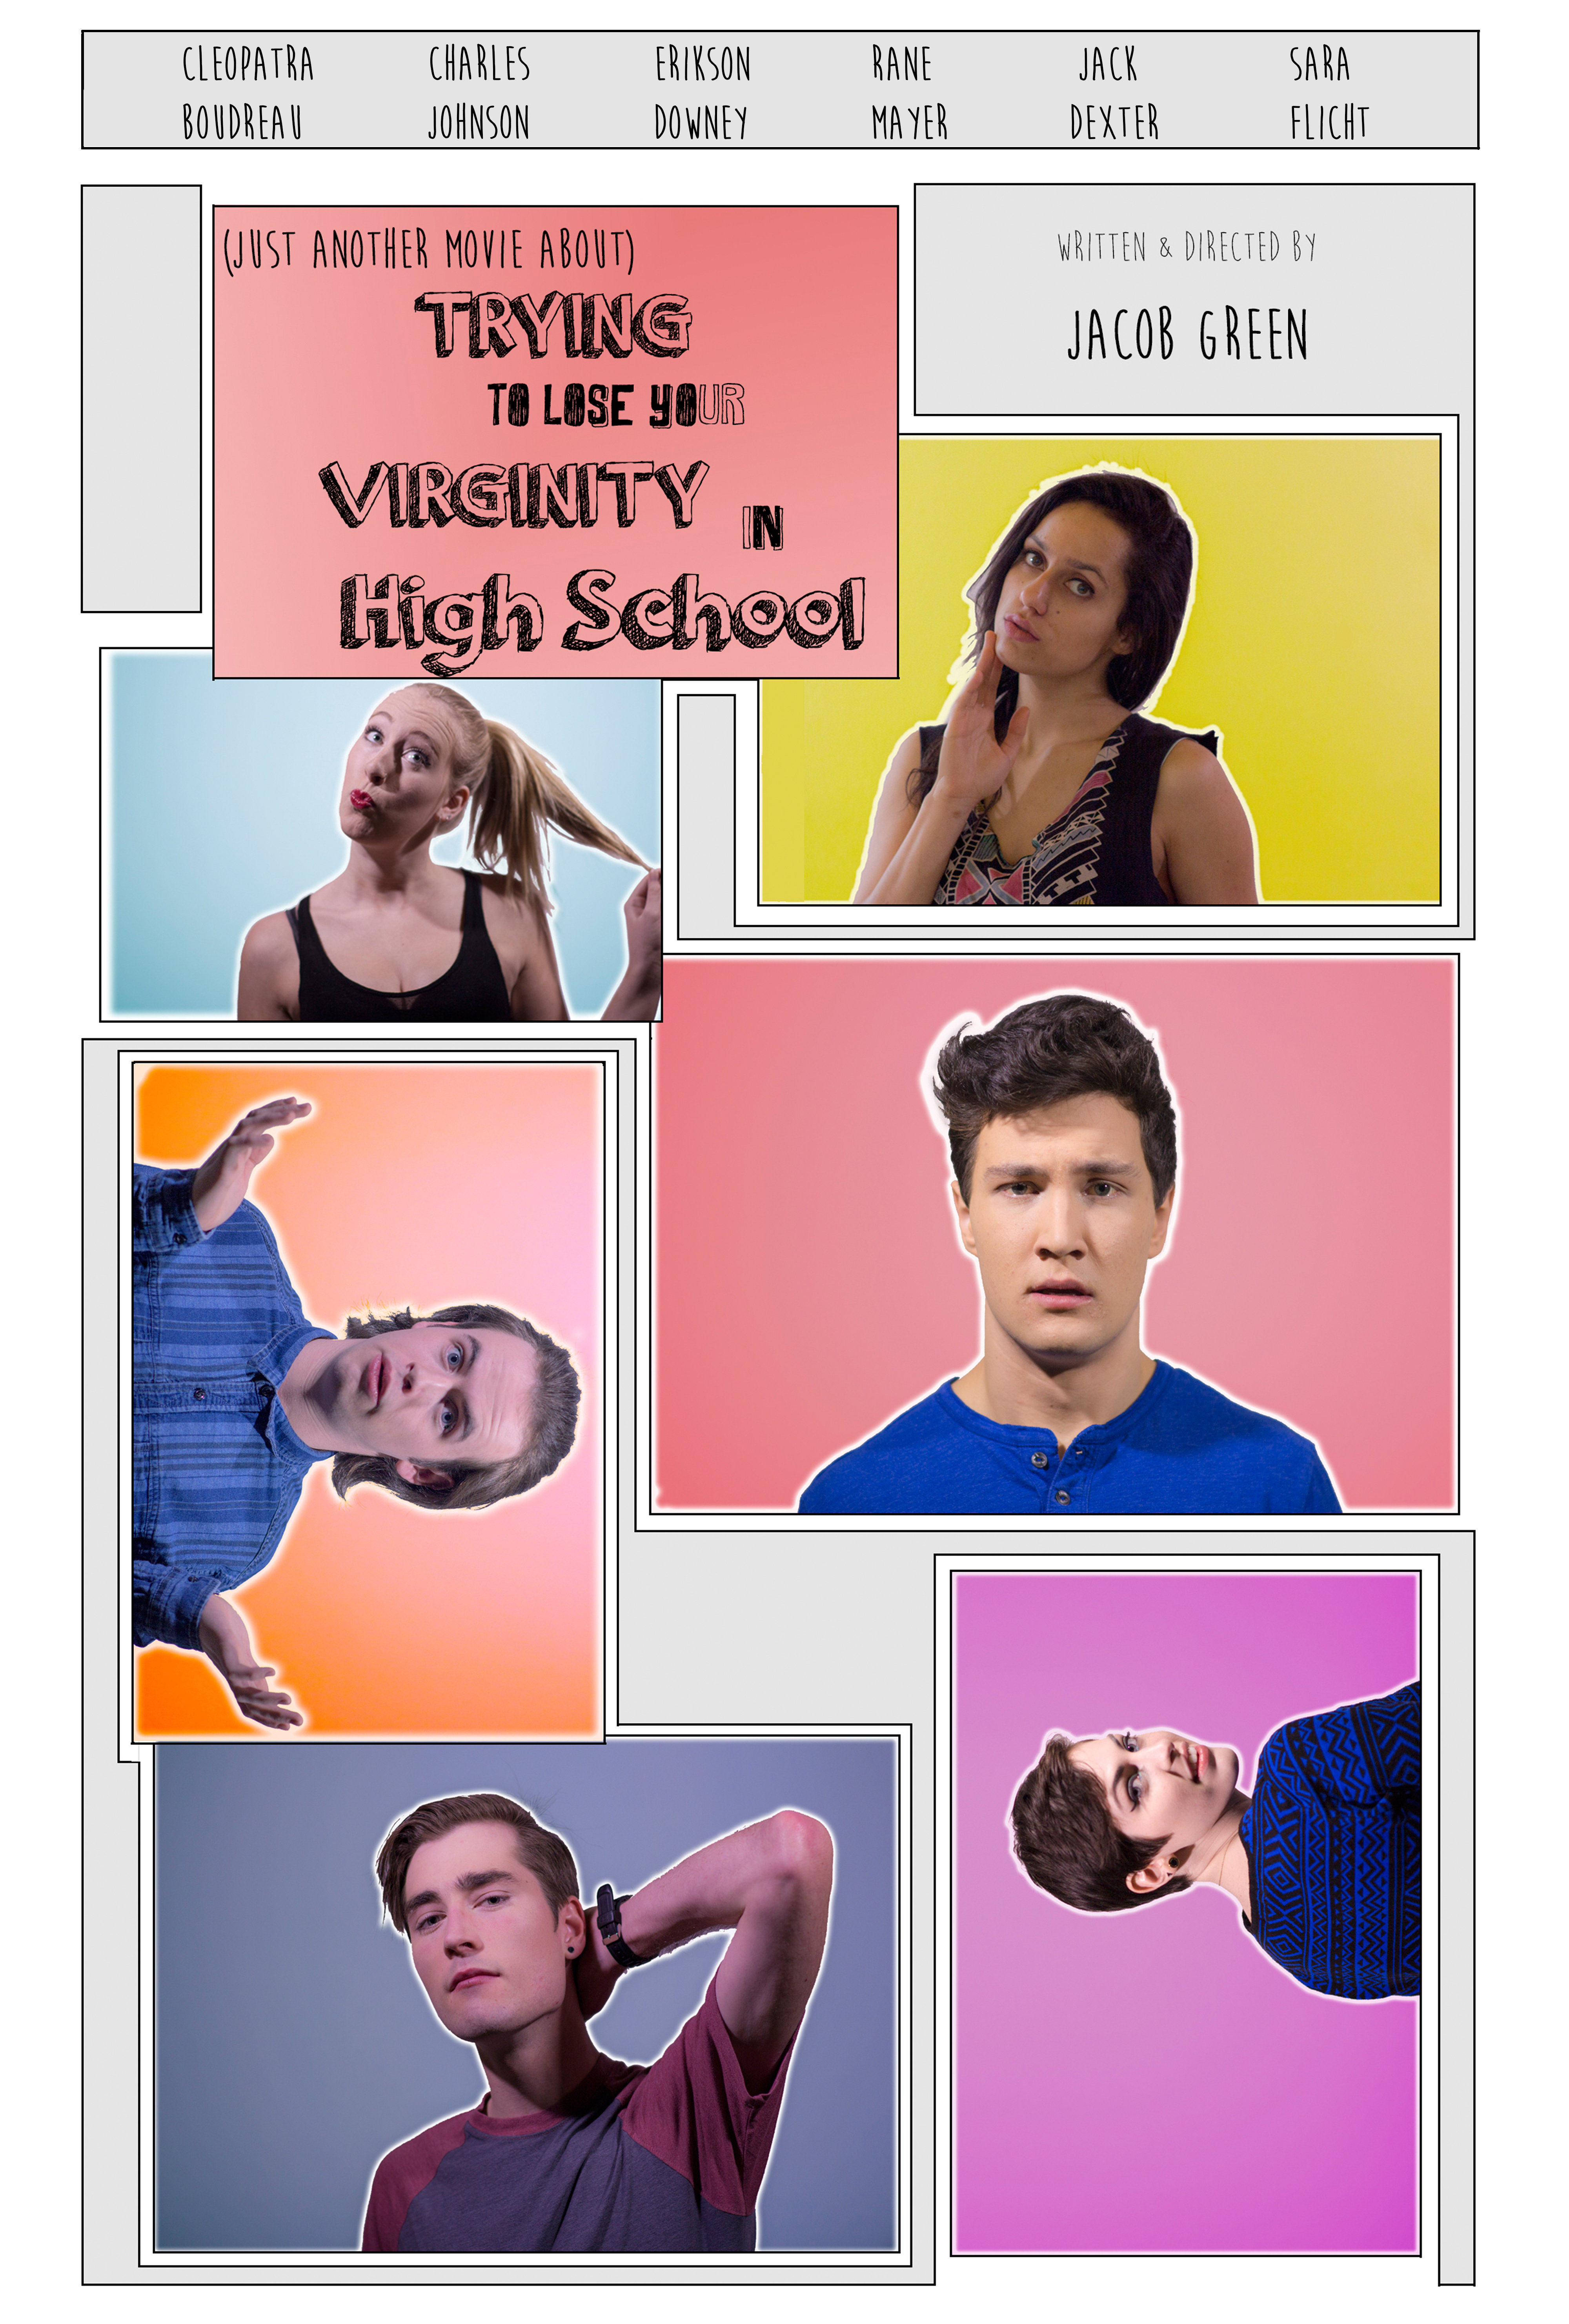 (Just Another Movie About) Trying to Lose Your Virginity in High School постер